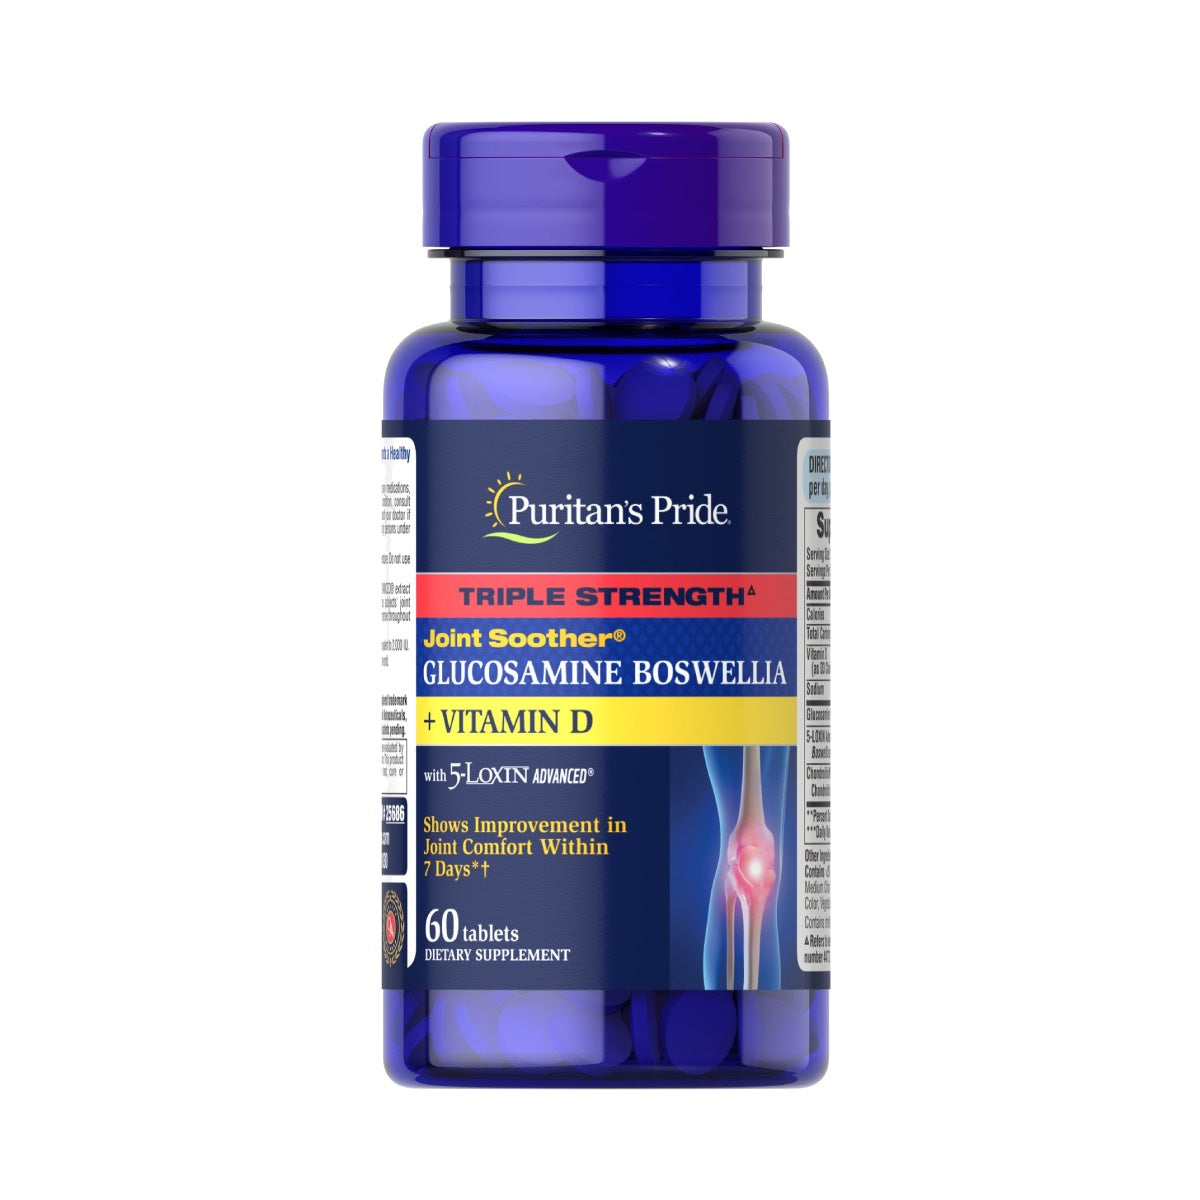 Puritan's Pride, Triple Strength Joint Soother ® Glucosamine Boswellia + Vitamin D